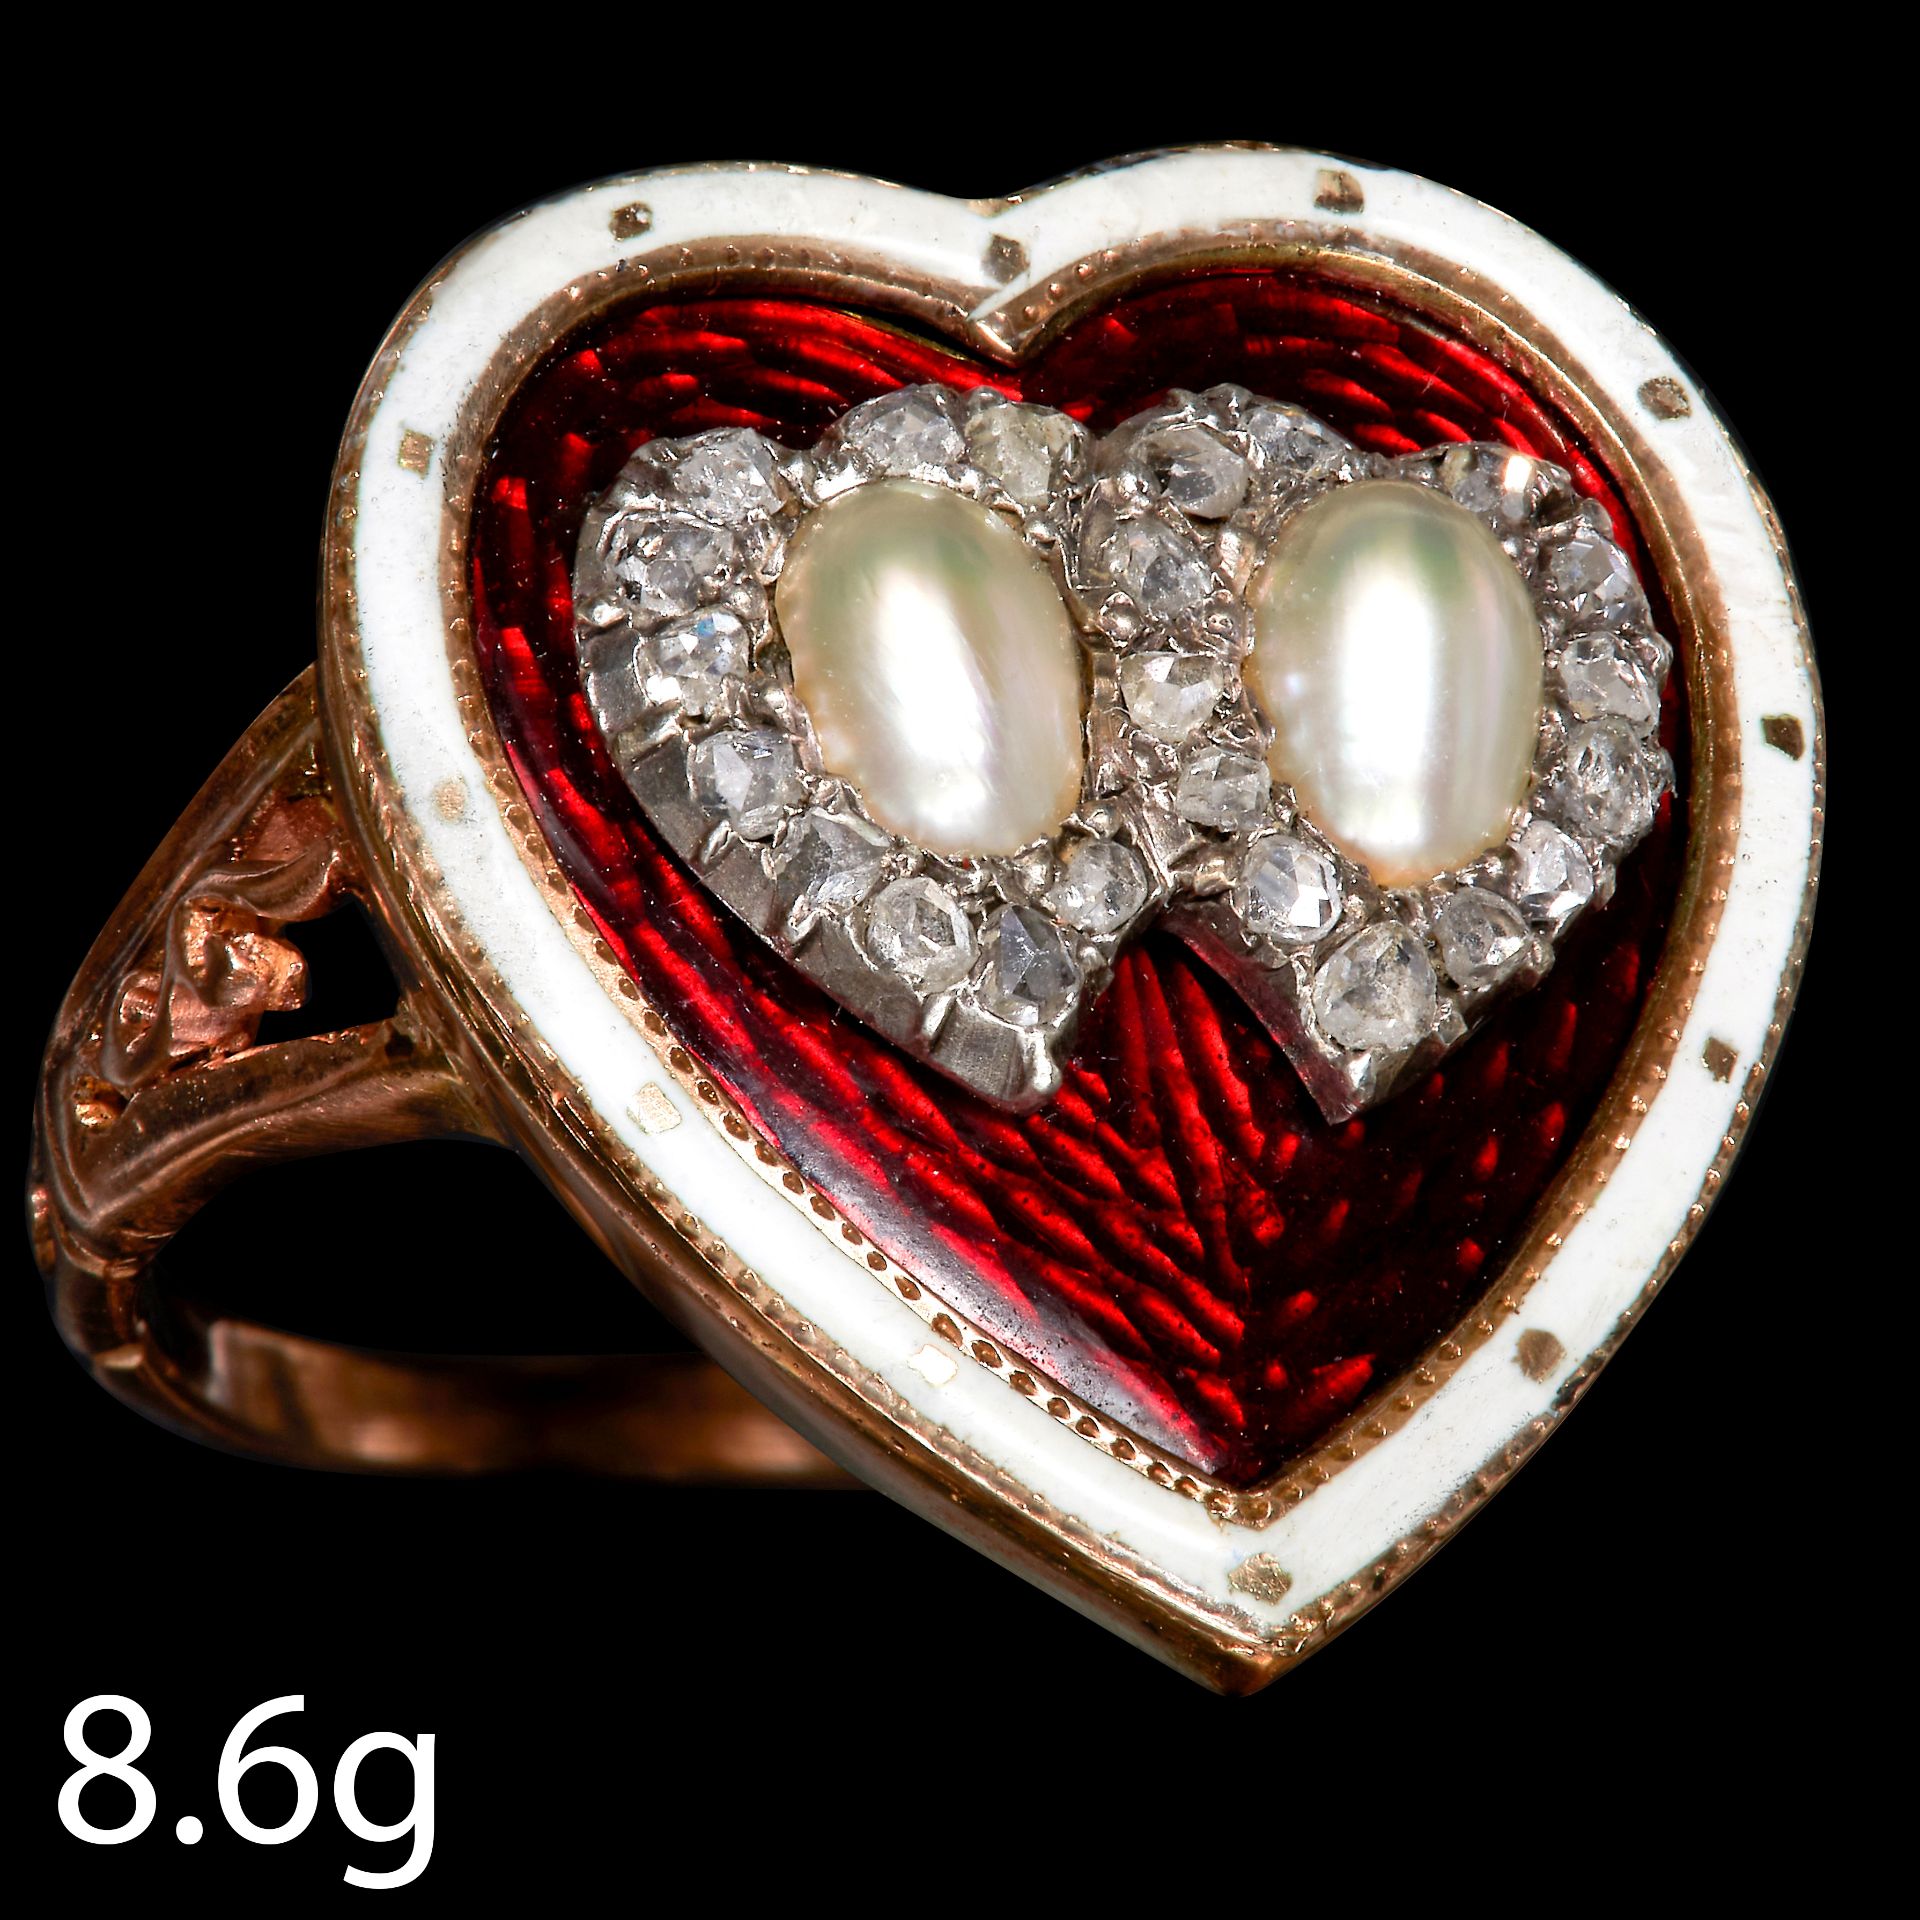 RARE ANTIQUE DIAMOND, PEARL AND ENAMEL DOUBLE HEART HEART RING